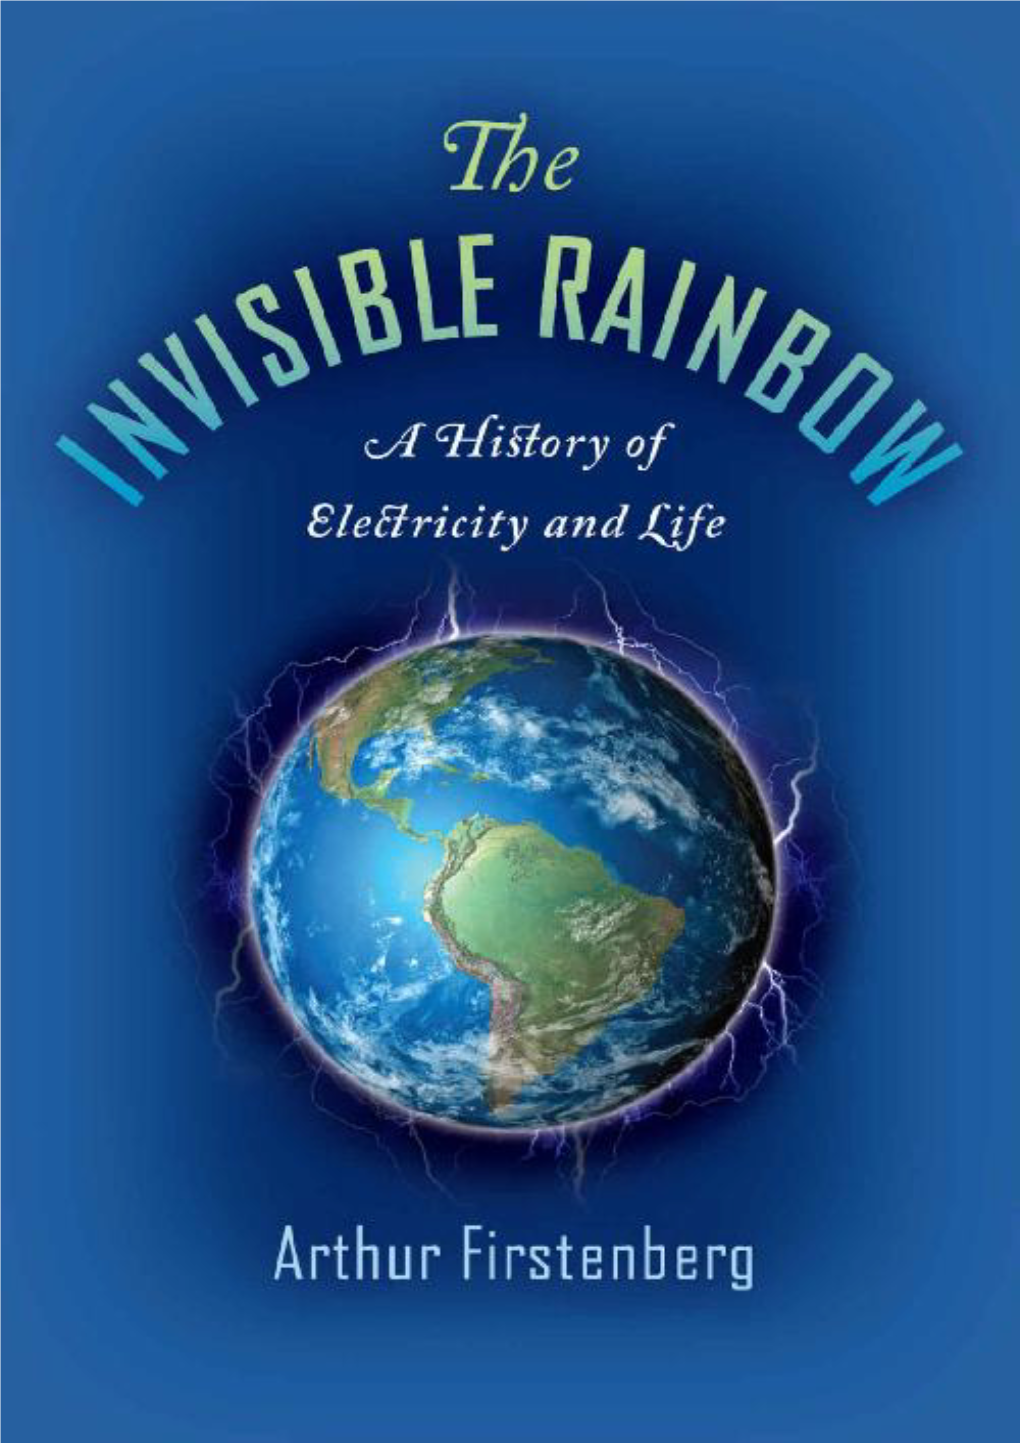 The INVISIBLE RAINBOW a History of Electricity and Life